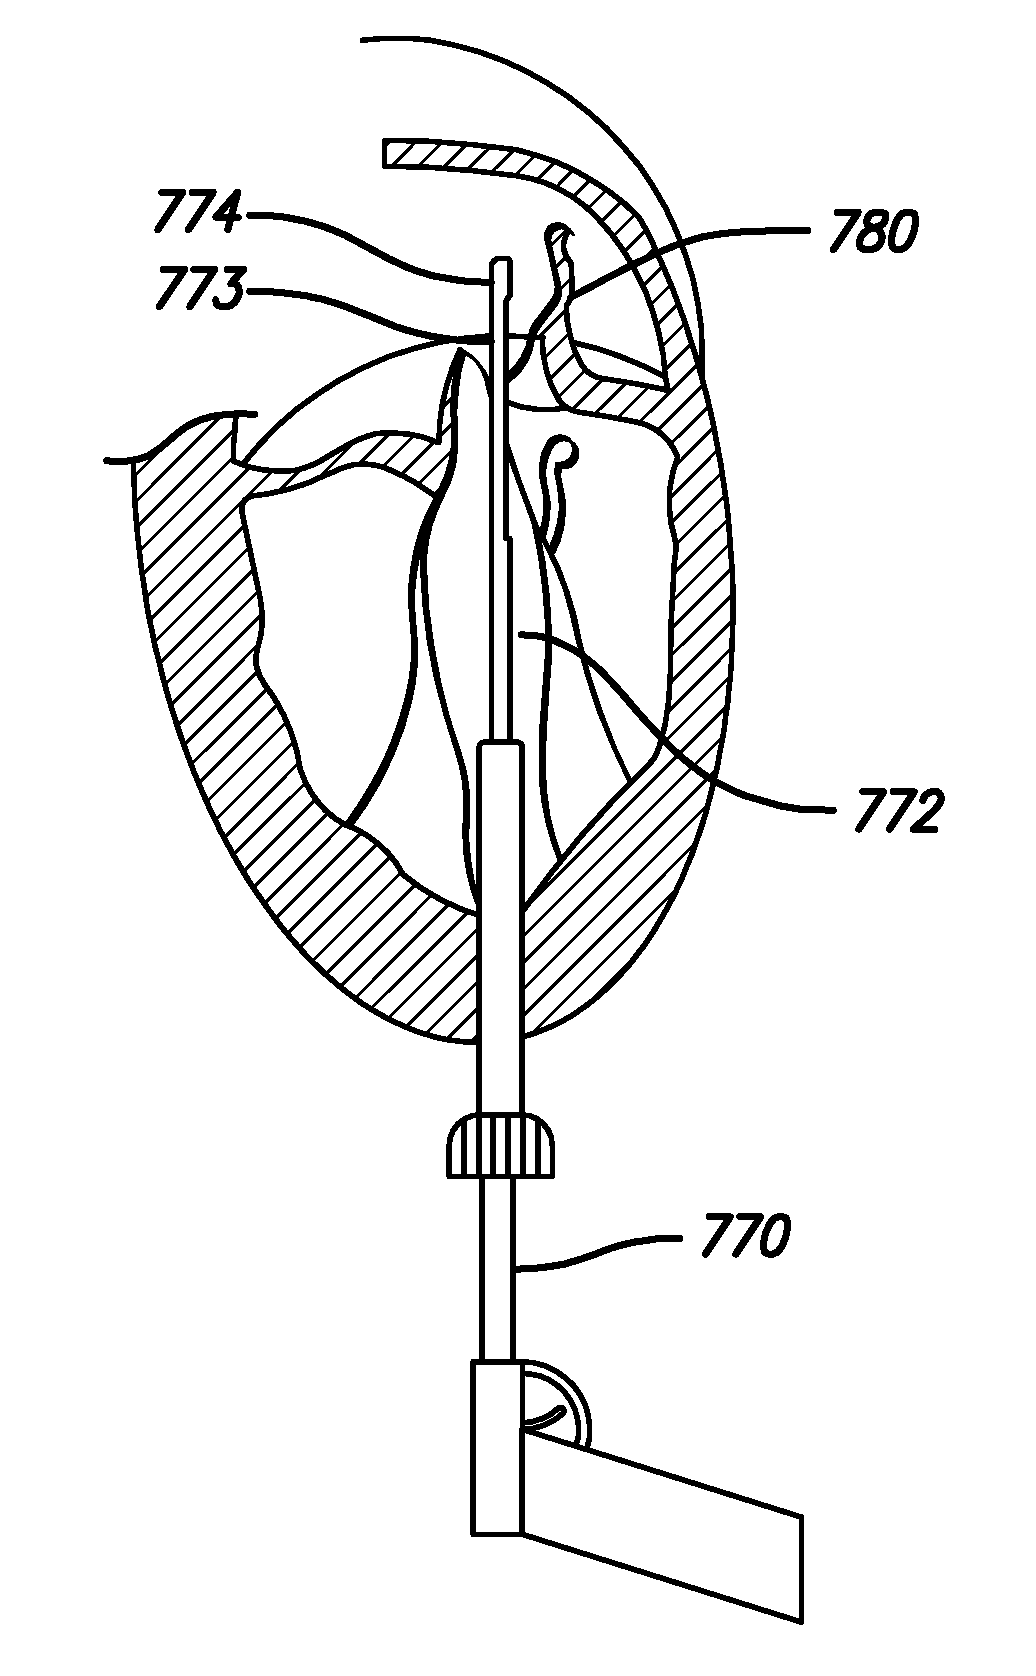 Methods and devices for performing cardiac valve repair